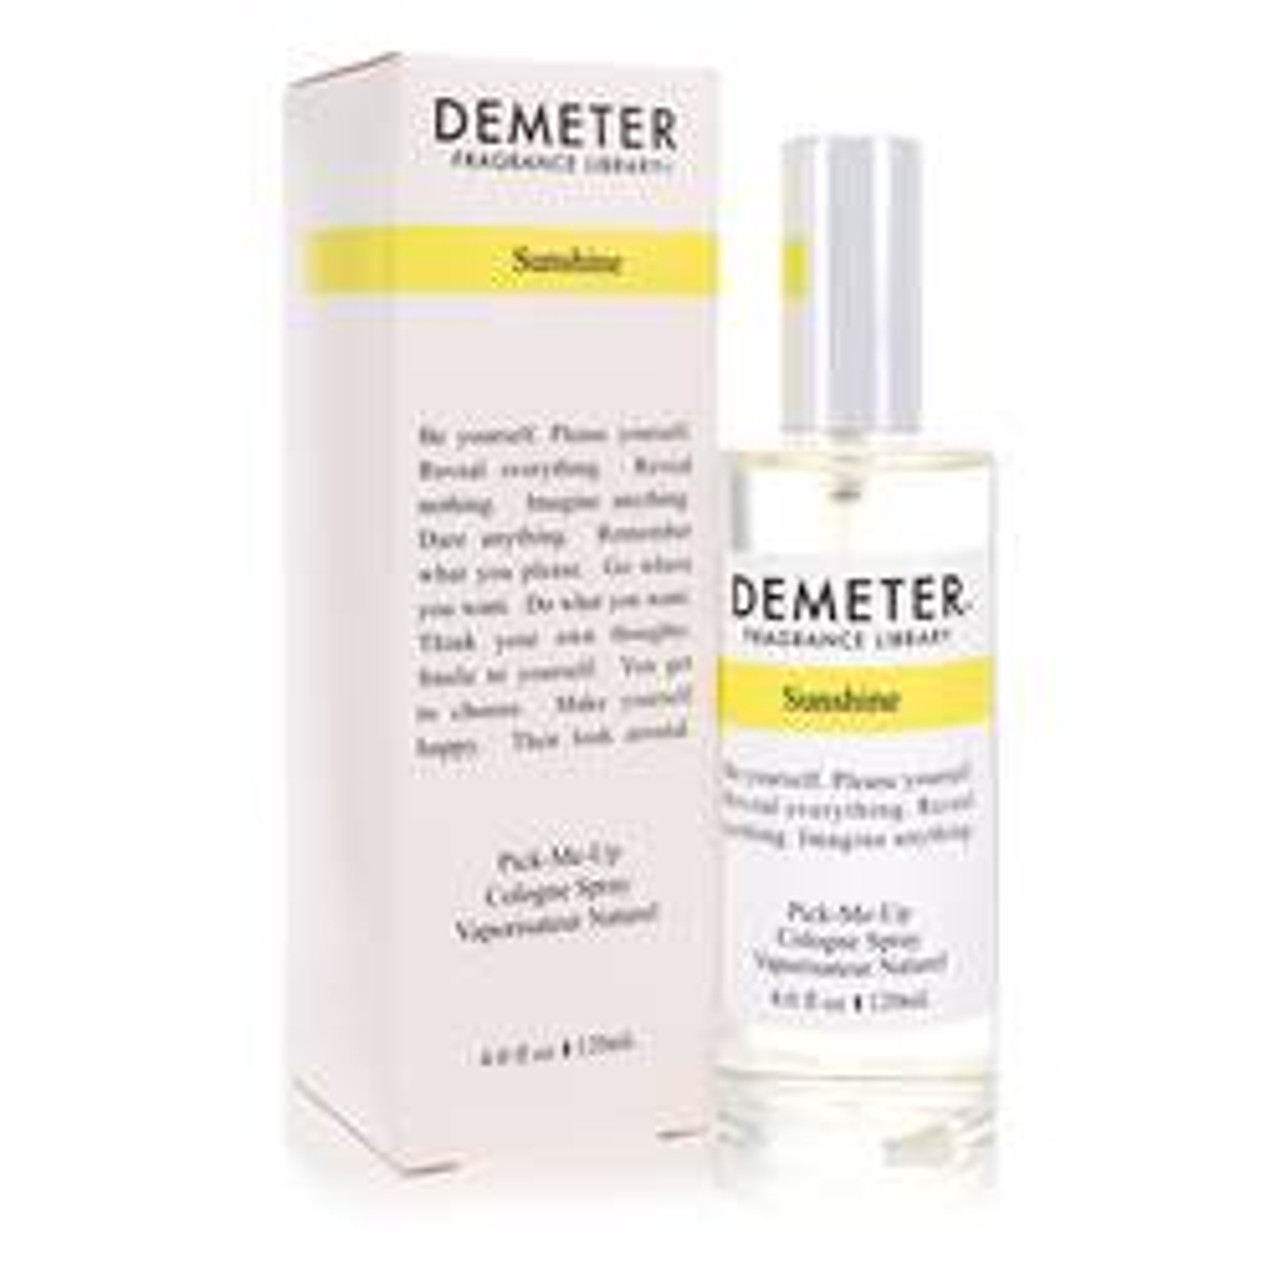 Demeter Sunshine Perfume By Demeter Cologne Spray 4 oz for Women - [From 79.50 - Choose pk Qty ] - *Ships from Miami